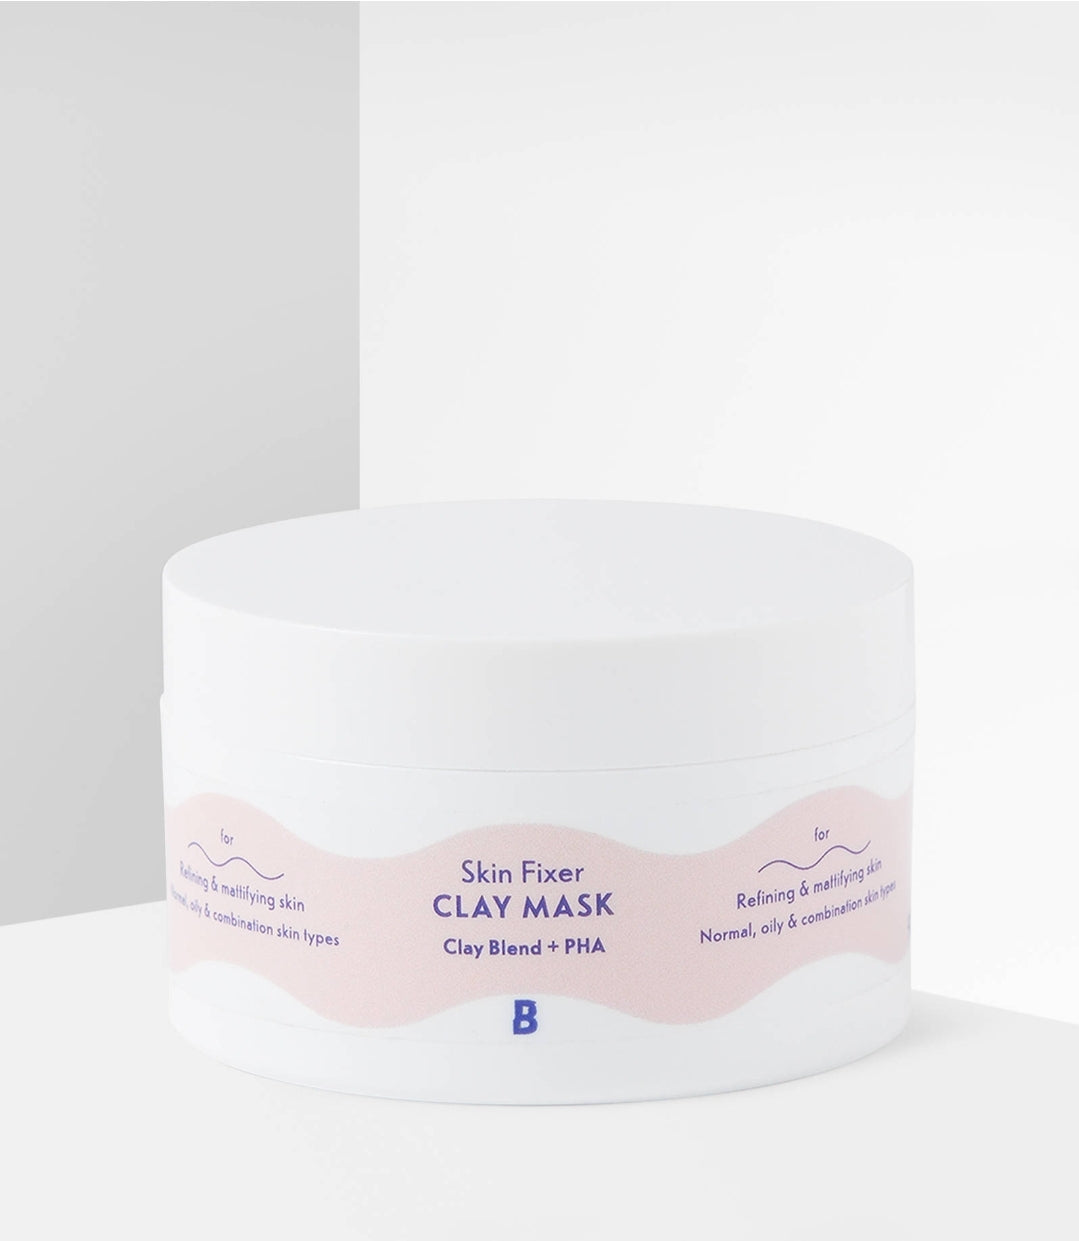 BY BEAUTY BAY

SKIN FIXER CLAY MASK WITH CLAY BLEND AND PHA